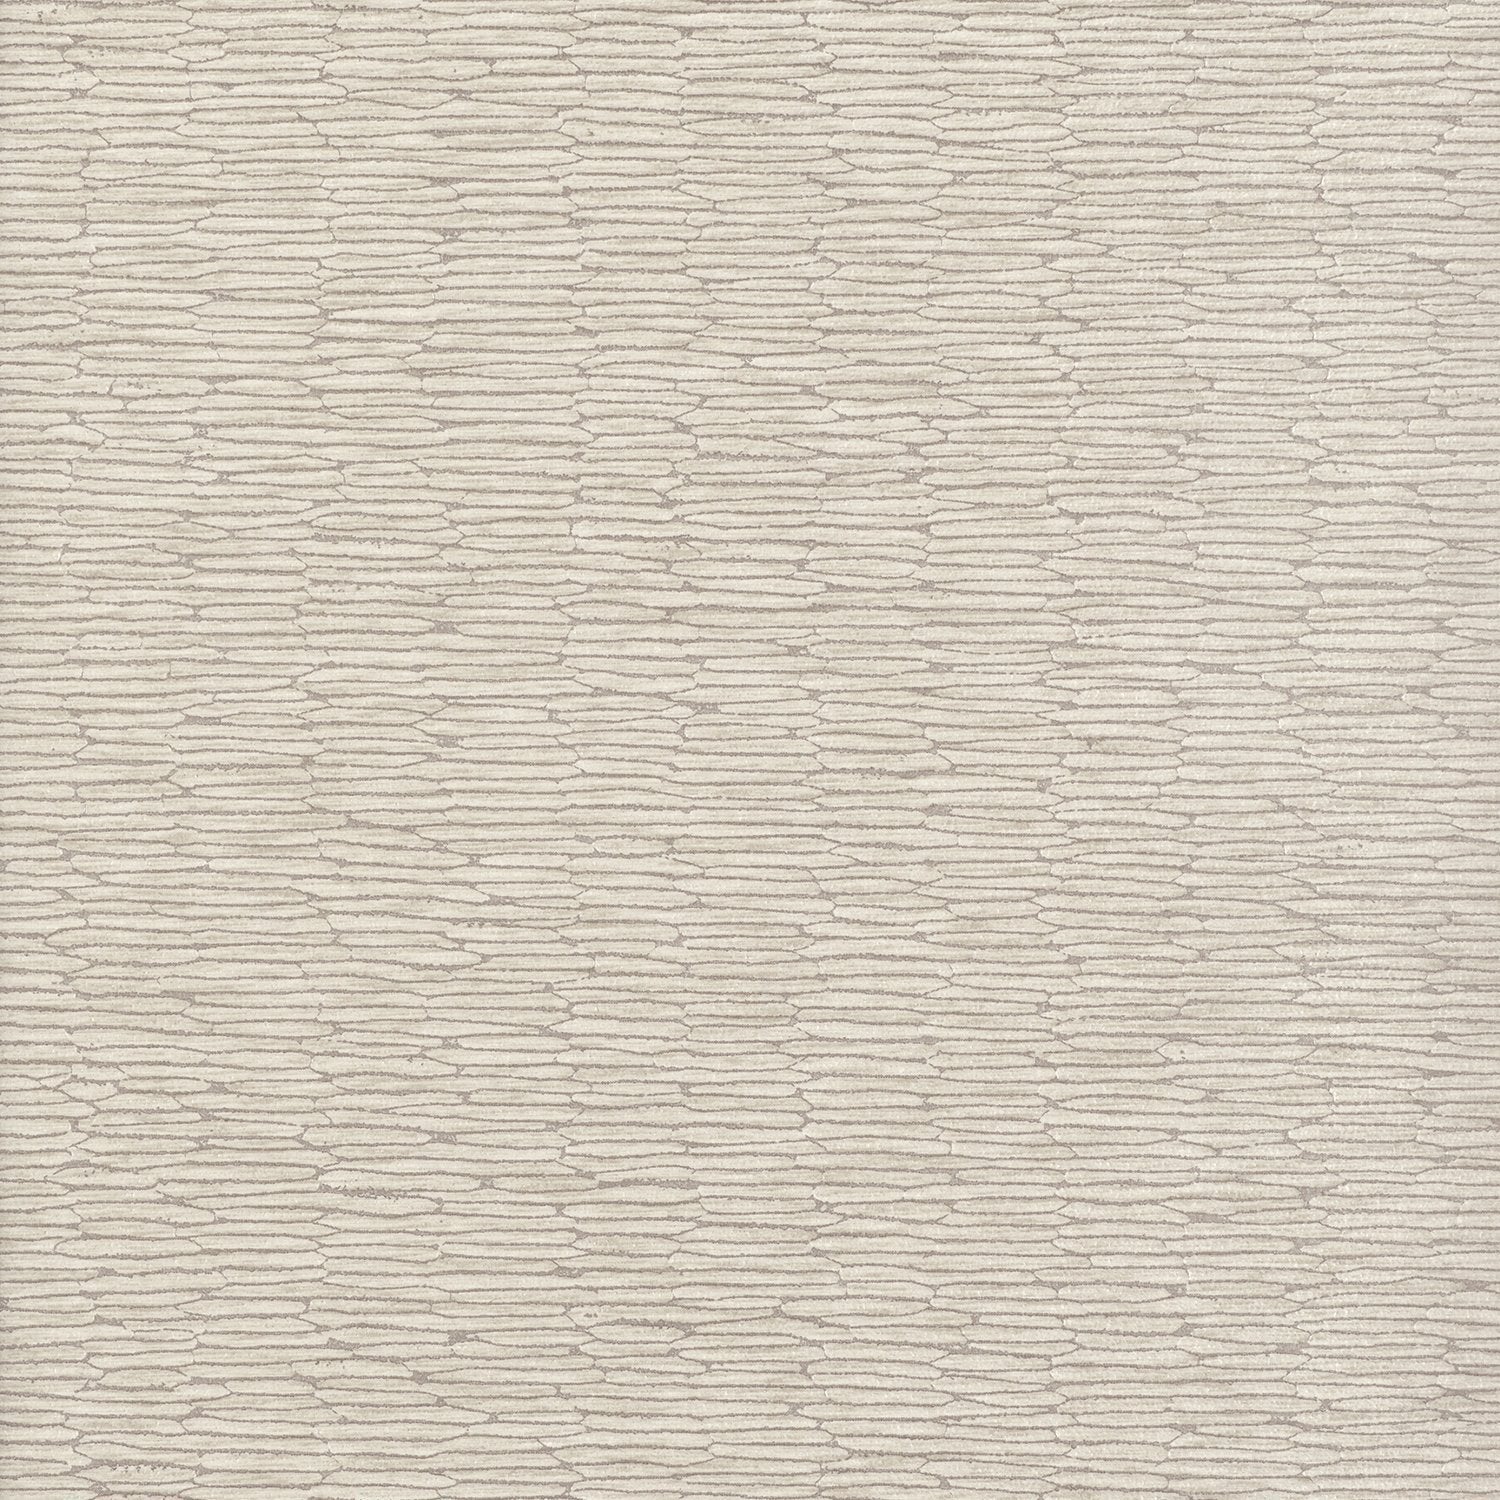 Chipper - Y46863 - Wallcovering - Vycon - Kube Contract